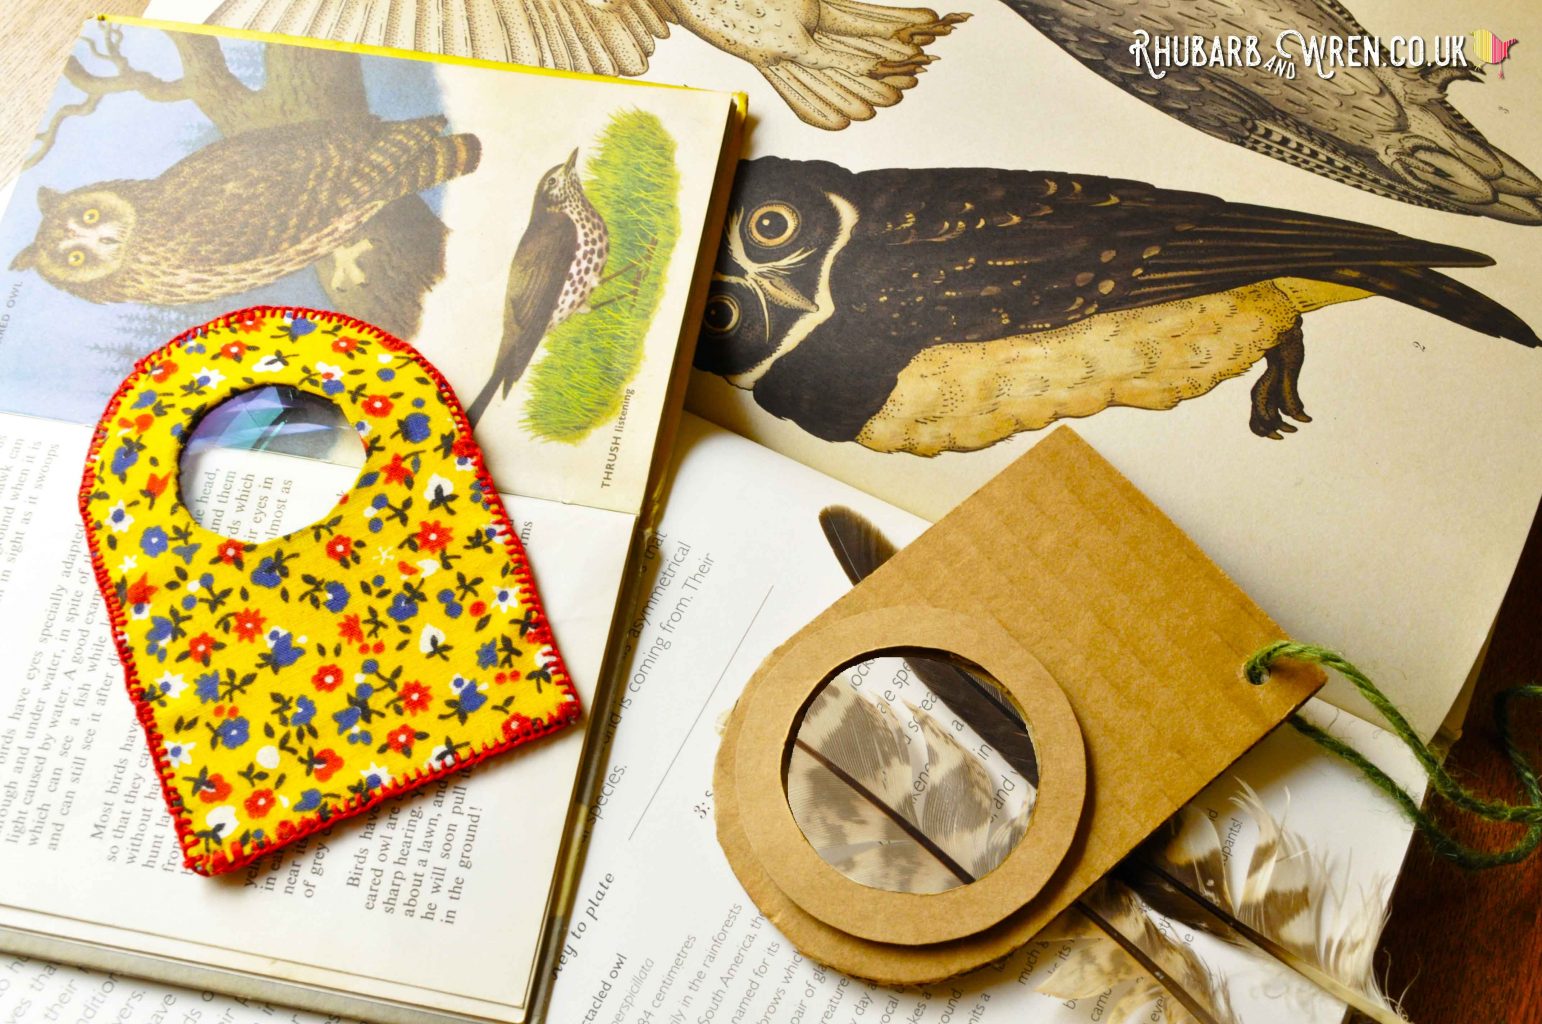 Two home-made real magnifying glasses - one fabric, one cardboard.